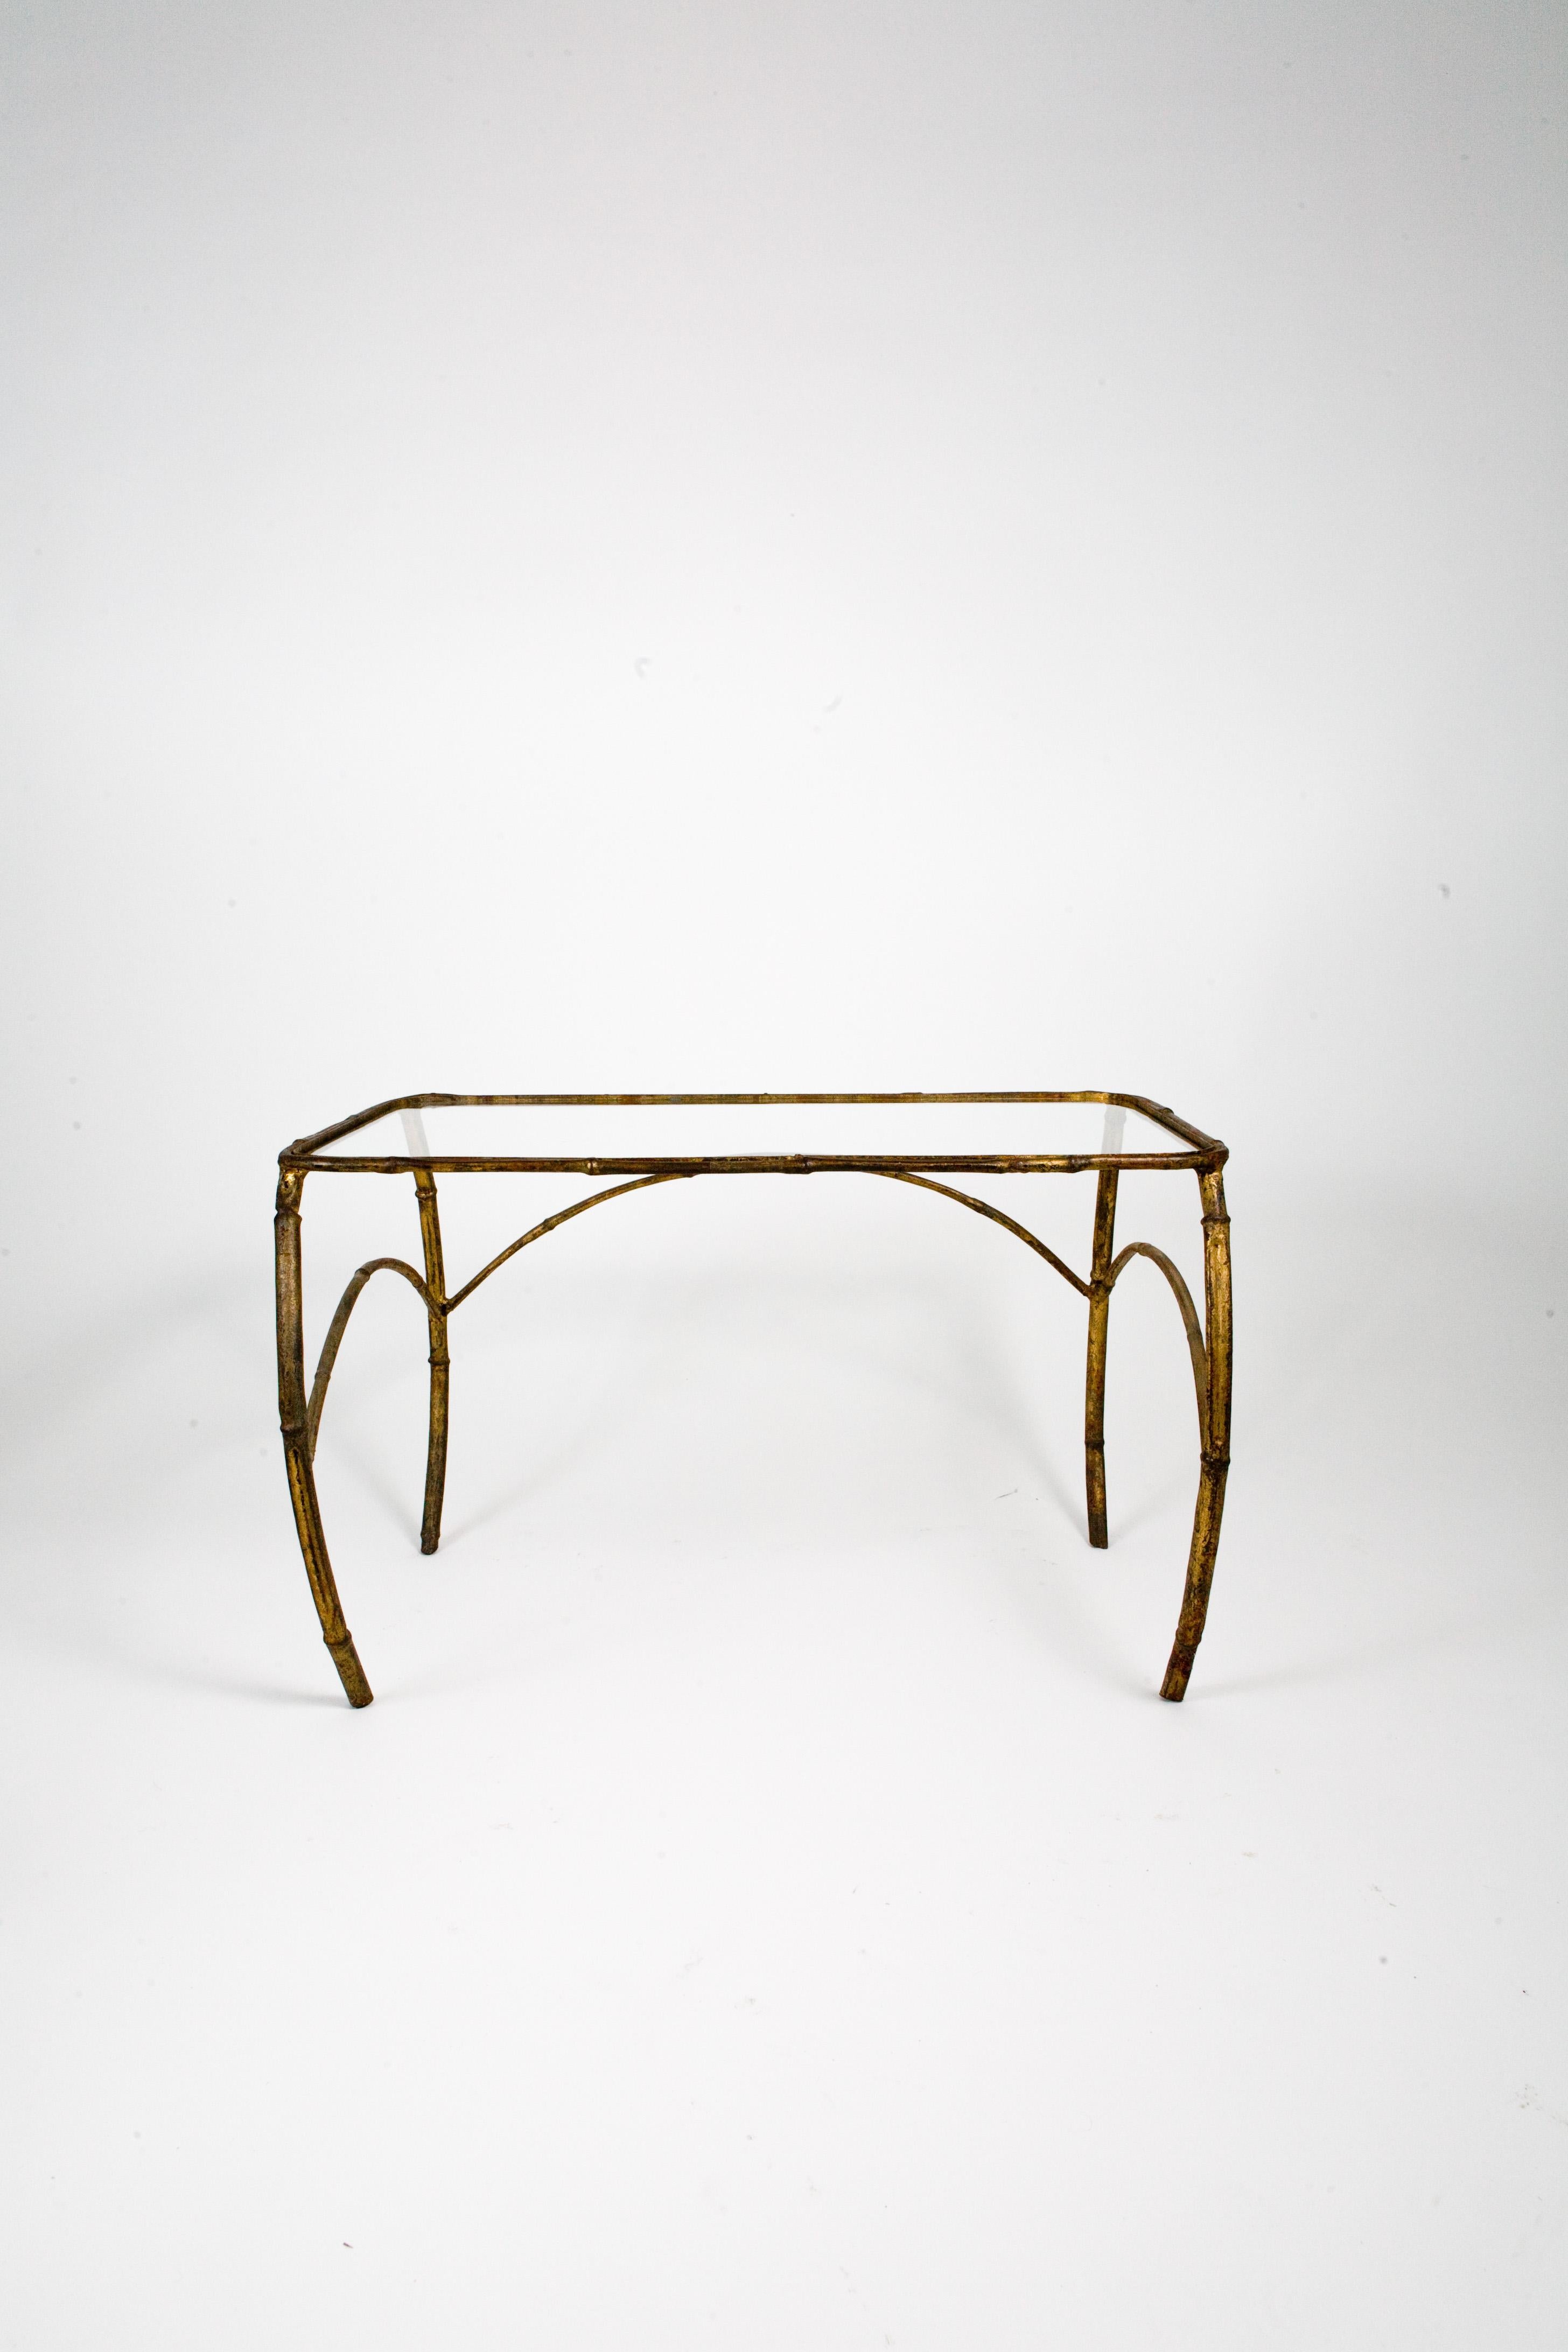 Set of three 1940s French Art Deco gilt metal nesting tables with curved faux bamboo metal legs and fitted glass tops.